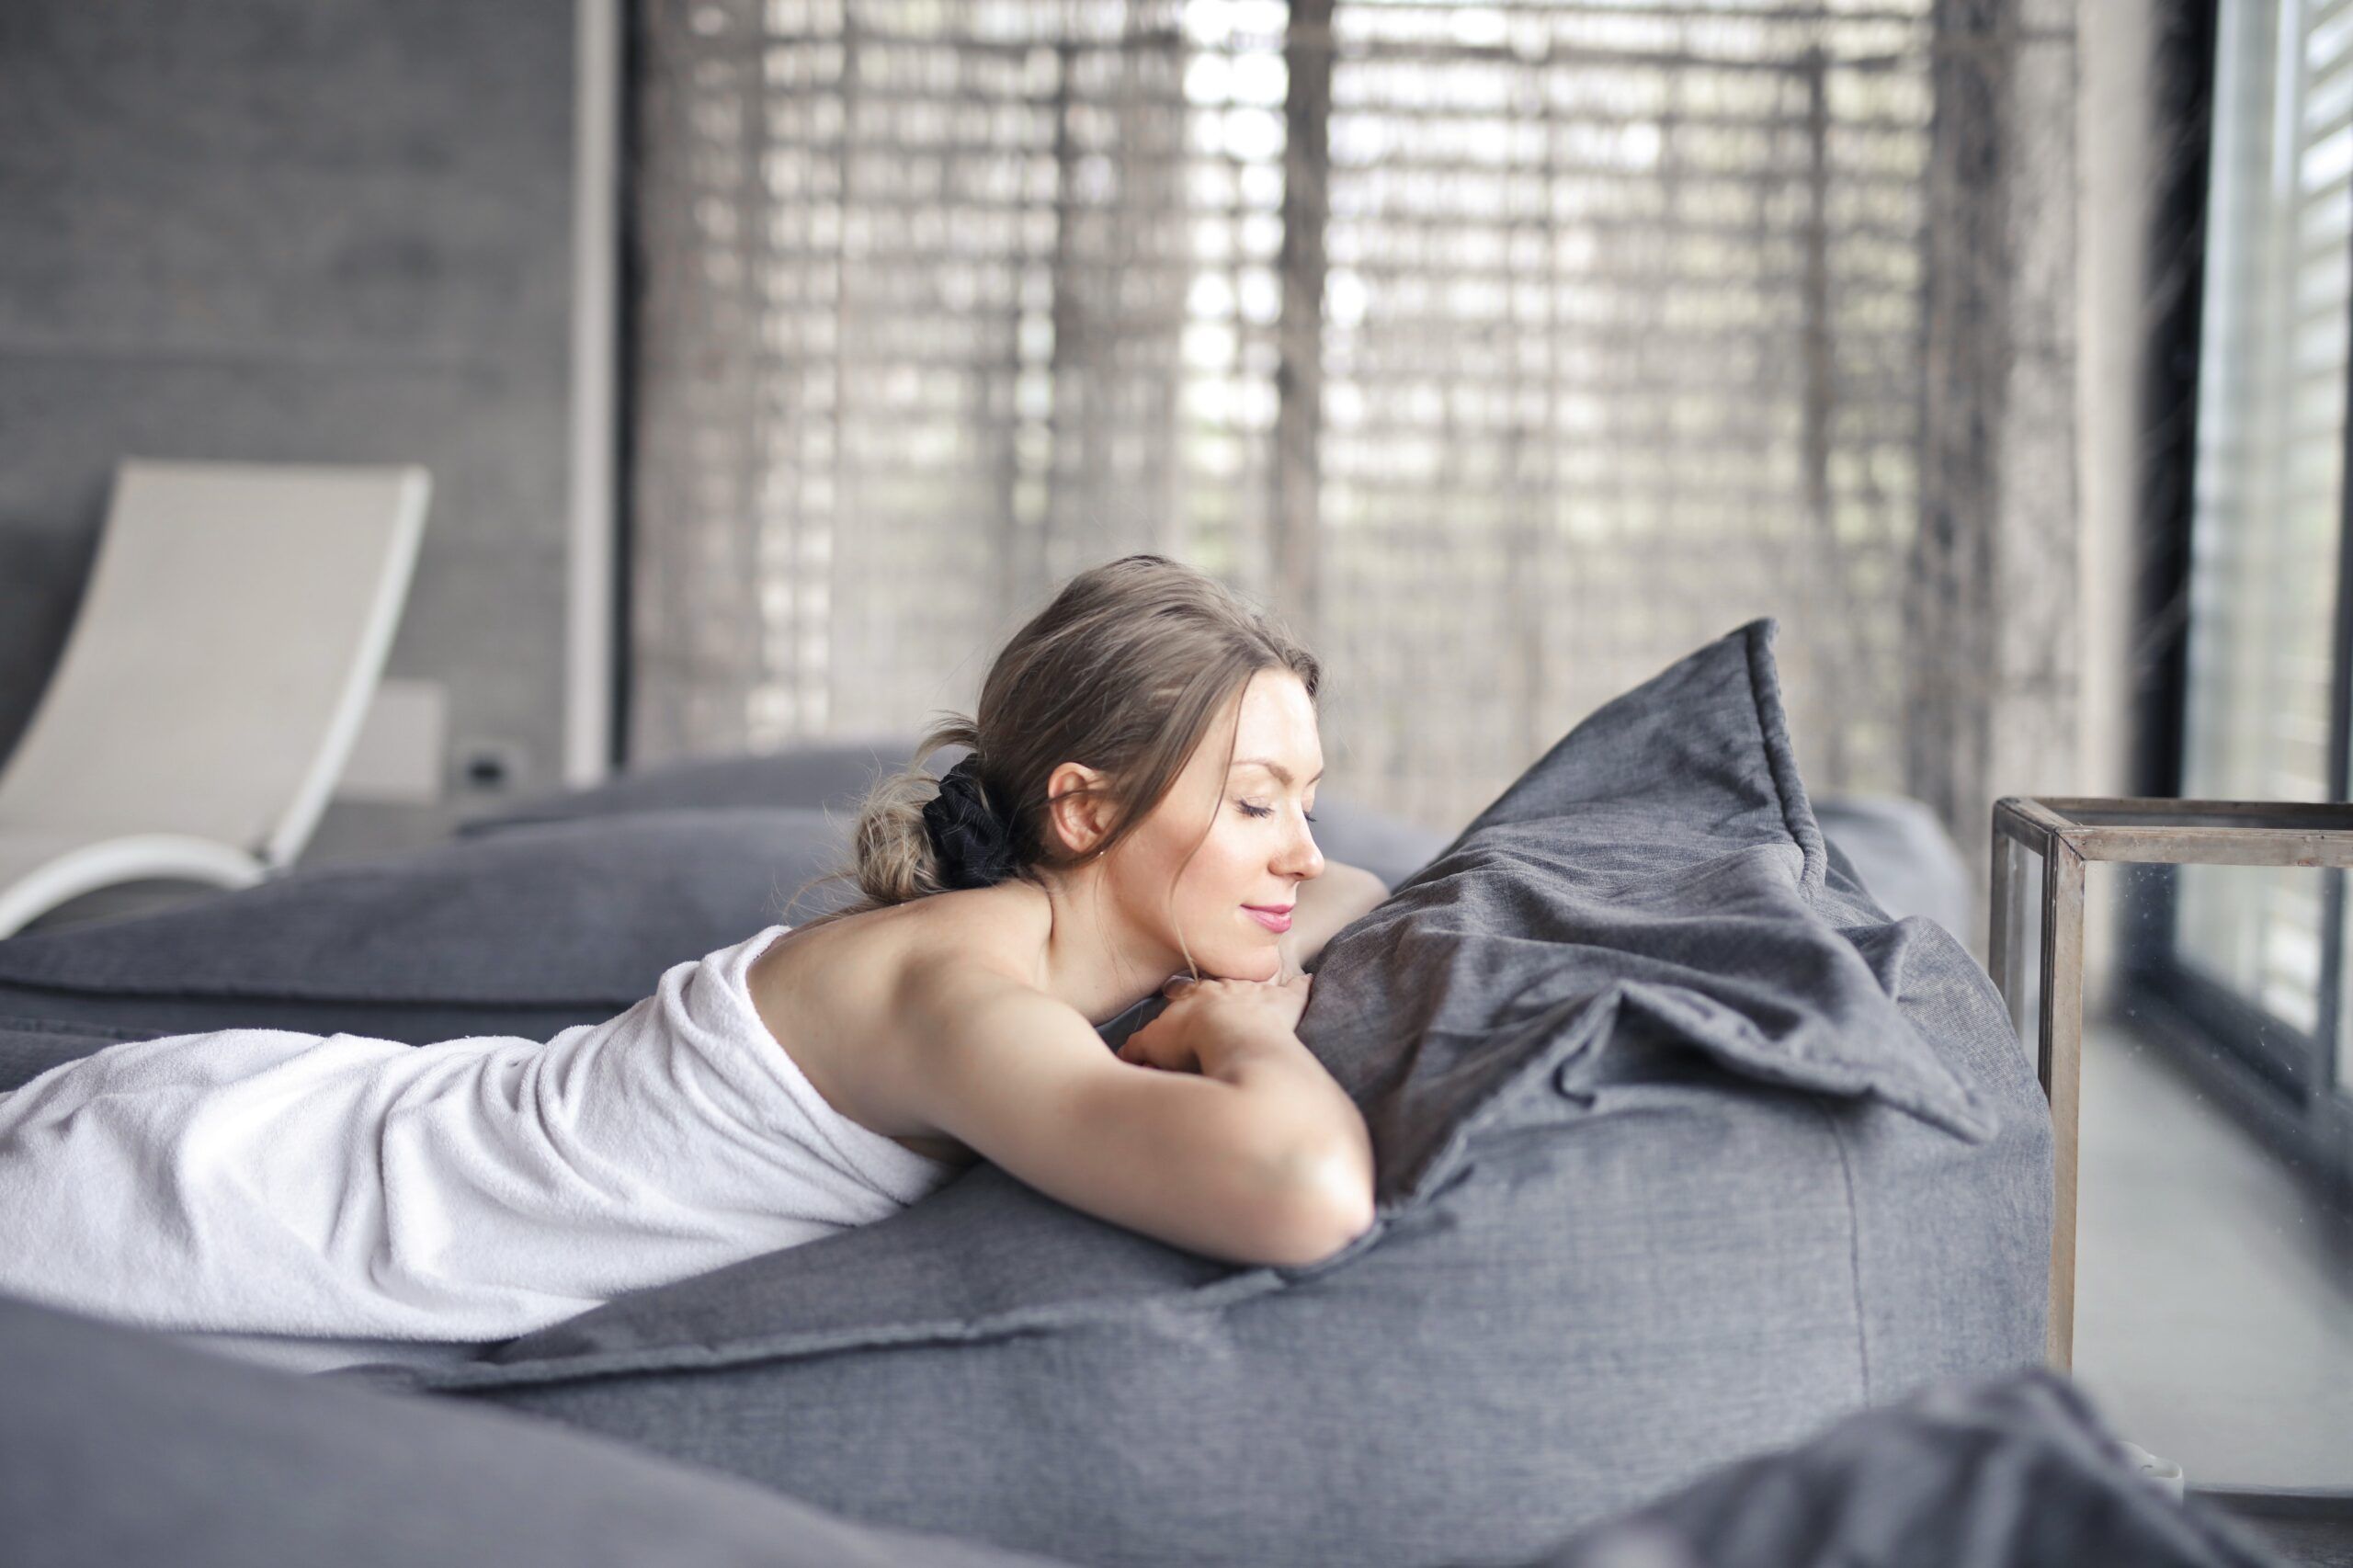 Woman enjoying Relaxation and better Mental Heatlh